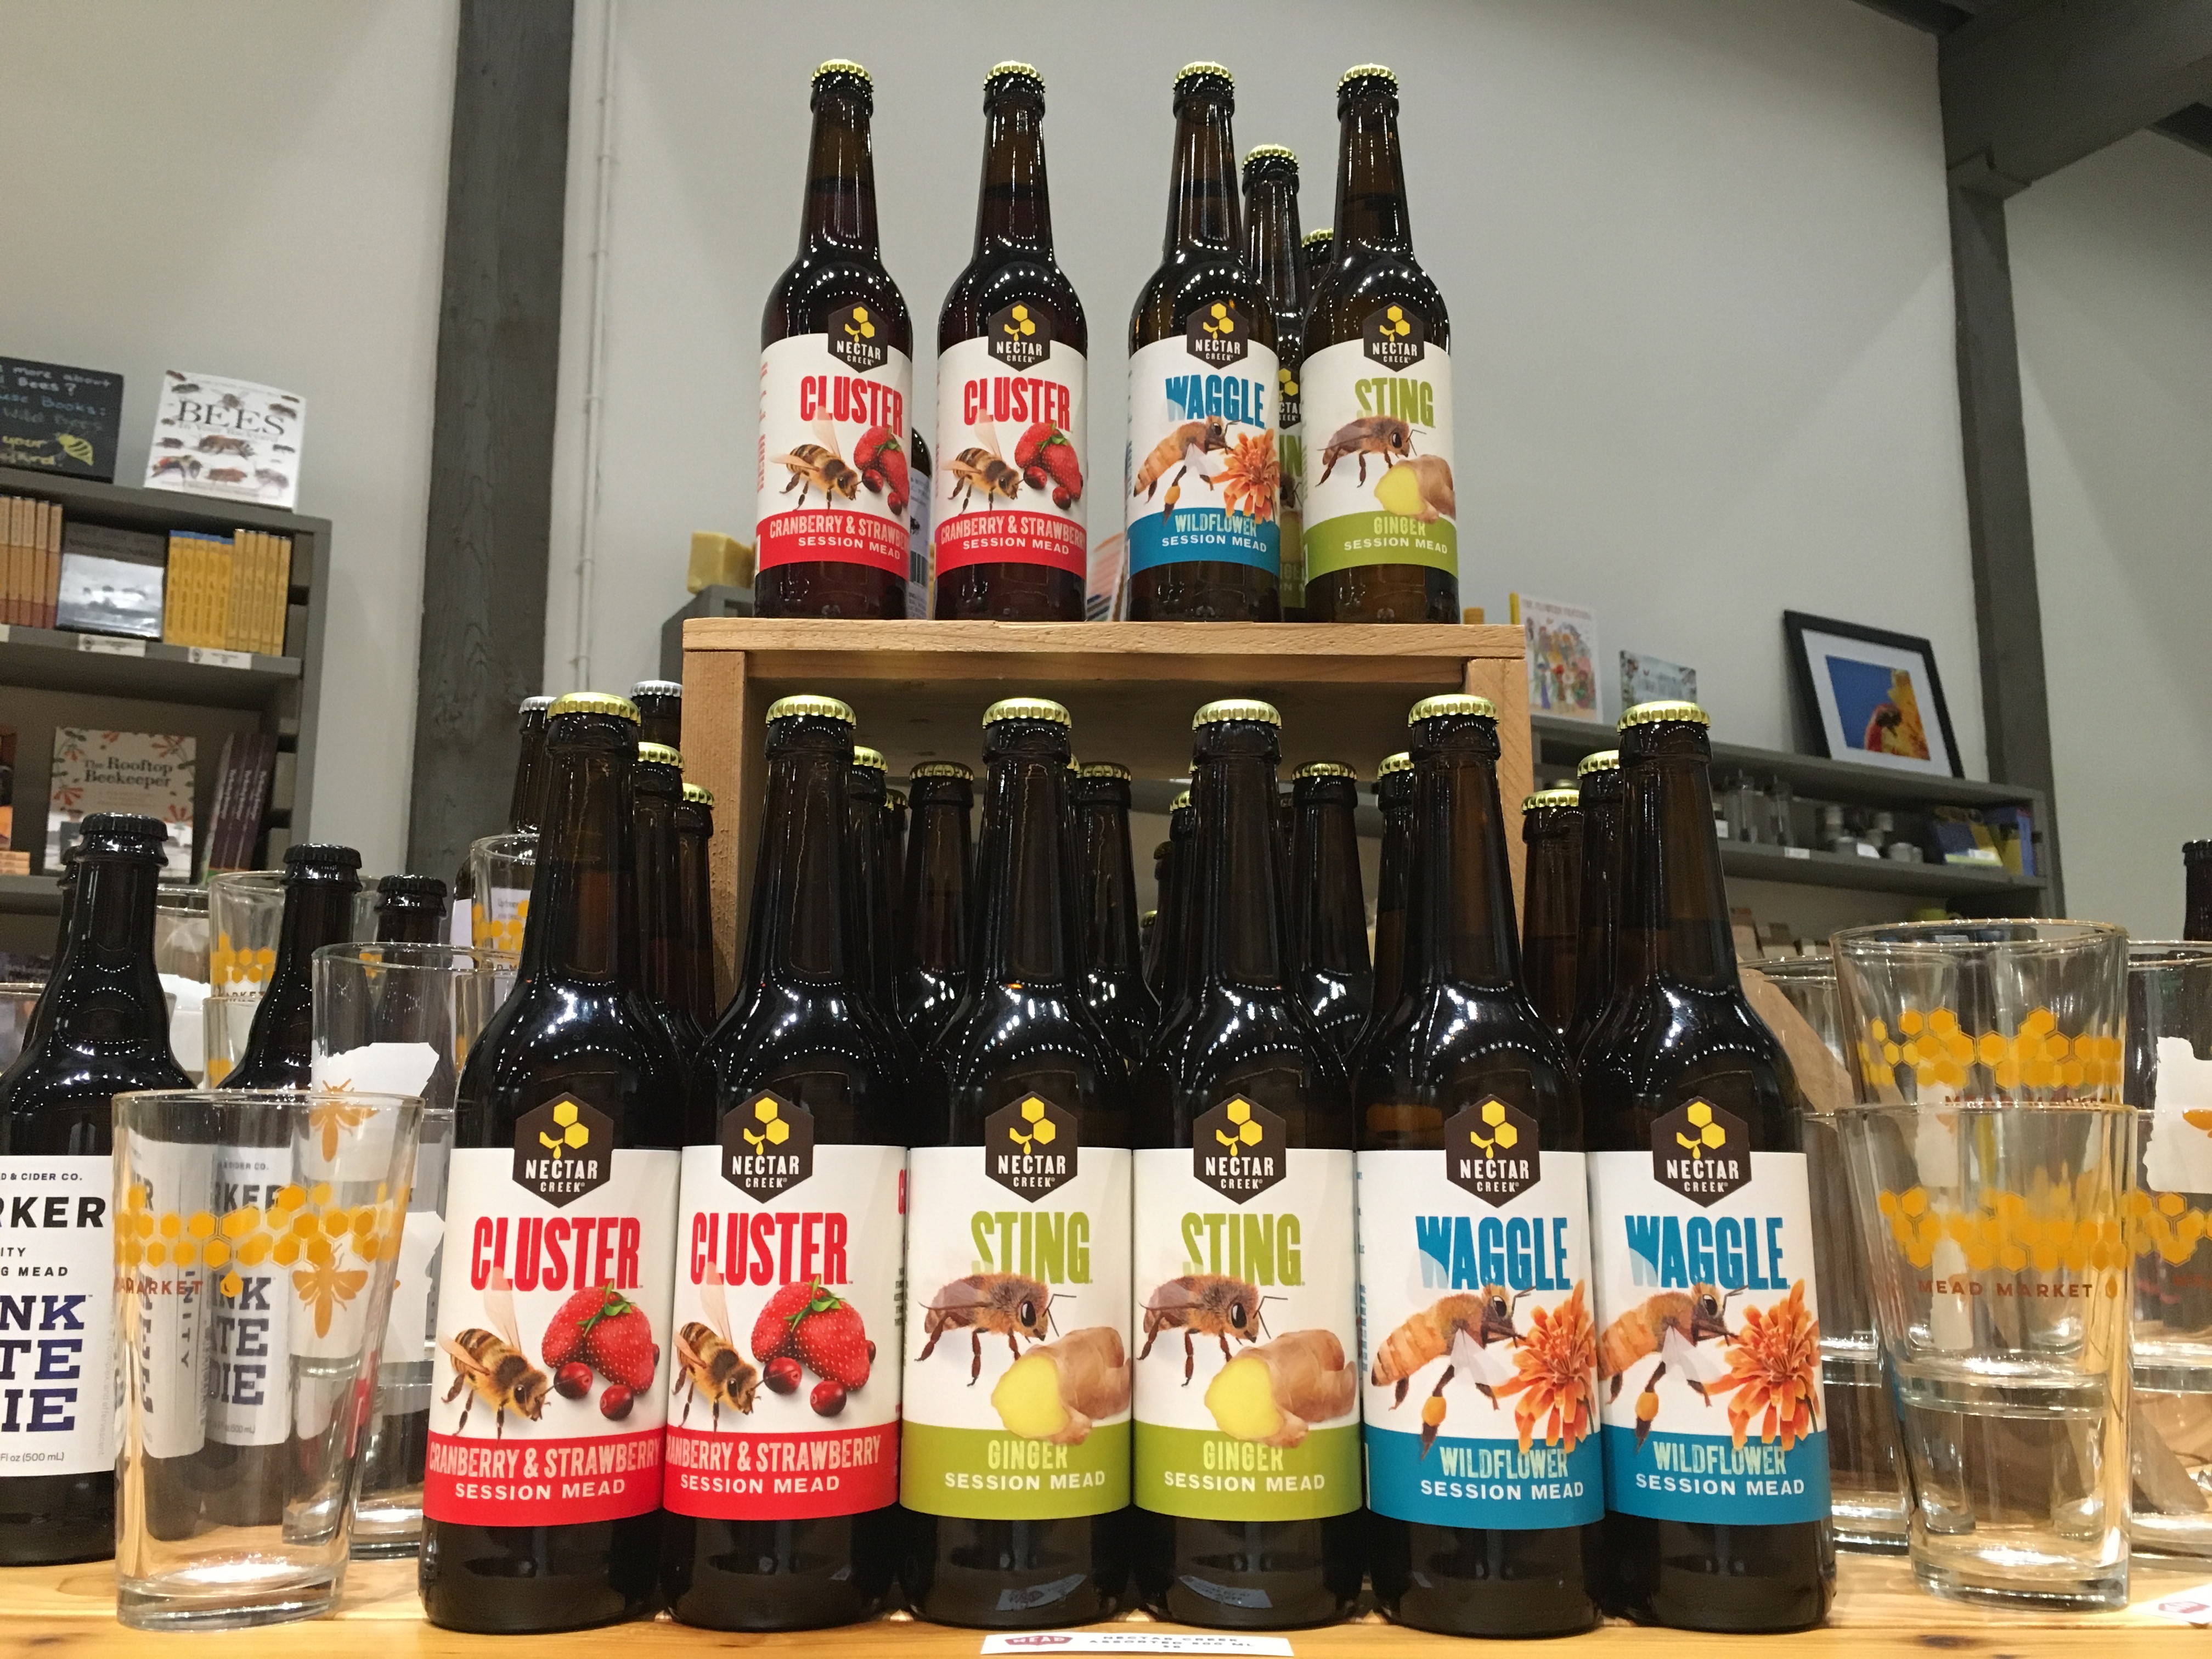 A display of Nectar Creek Mead at Mead Market.